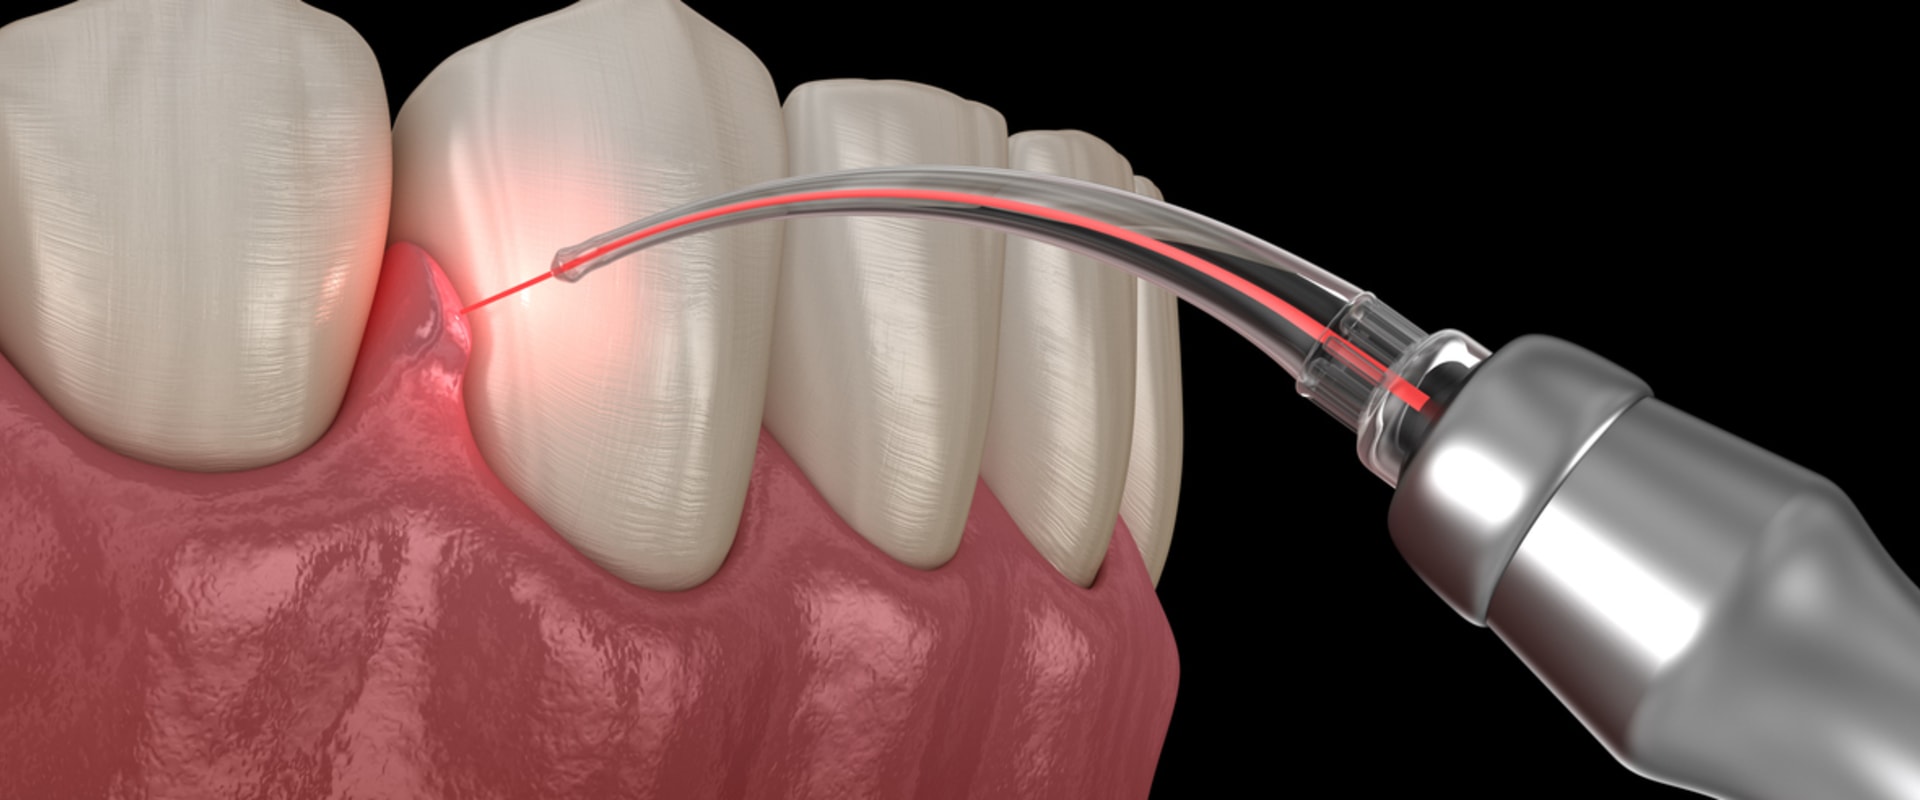 What Surgery is Needed for Periodontal Disease?